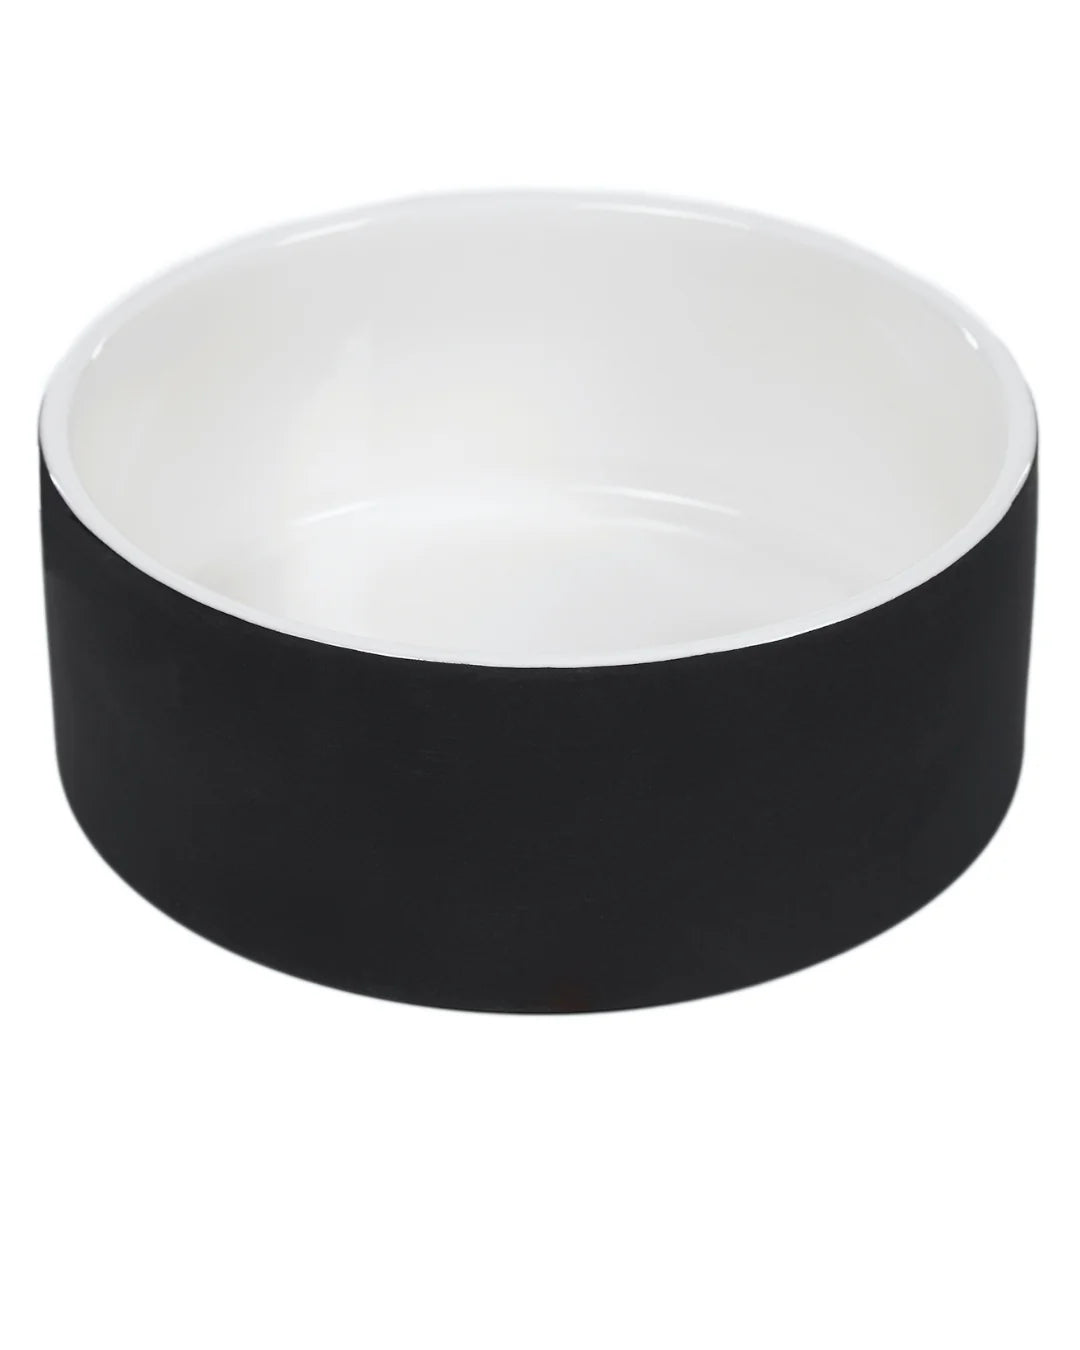 Cool Bowl Black S for Dogs